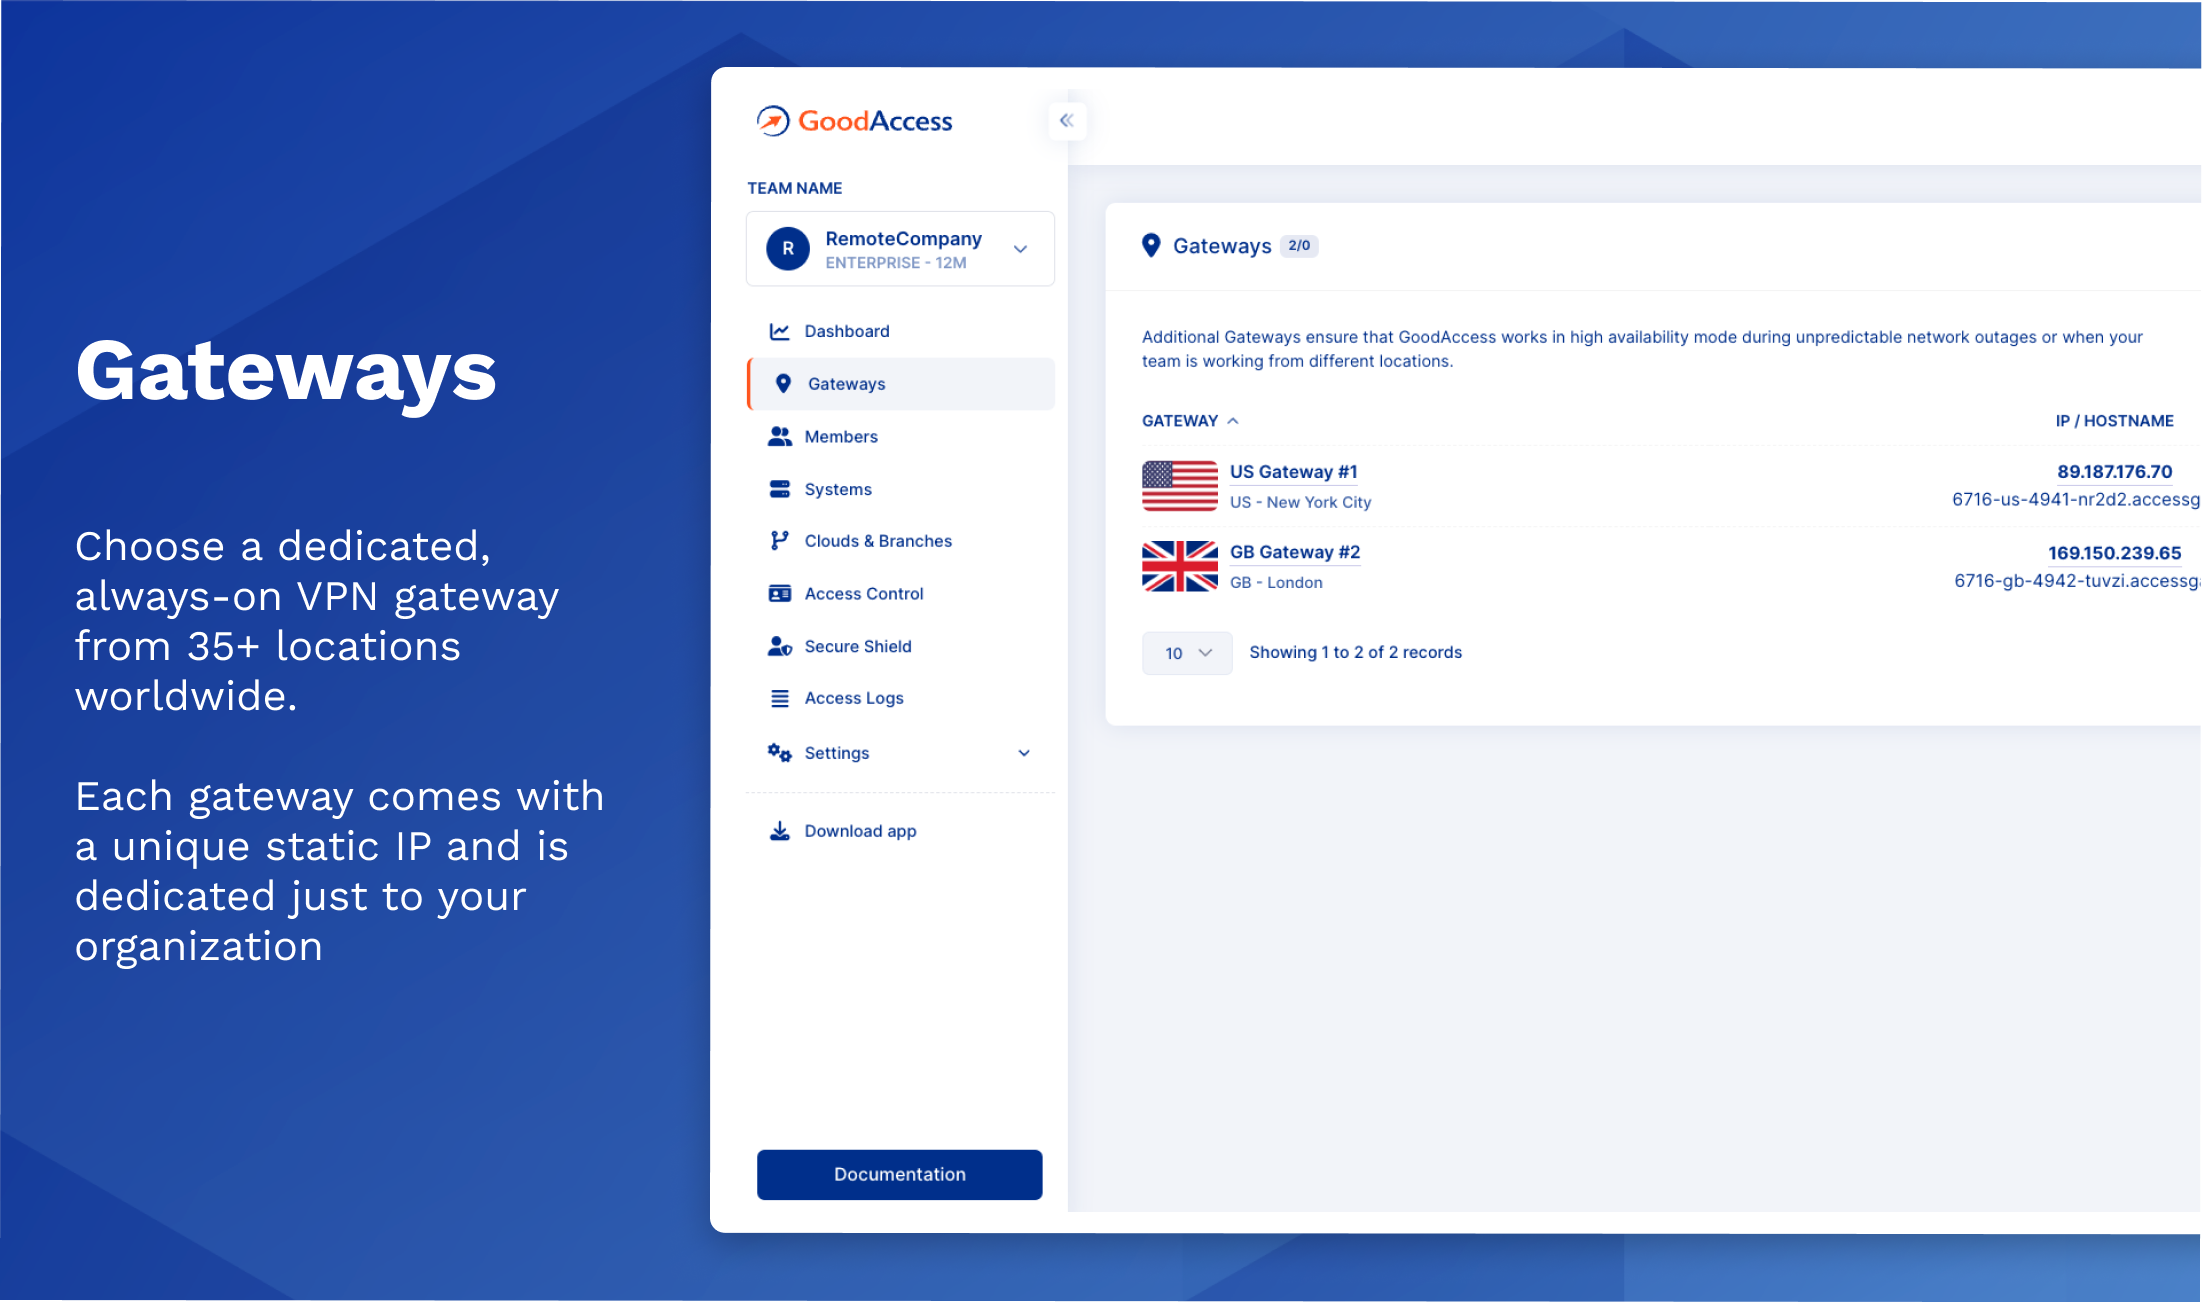 Instantly deploy a private gateway with a dedicated static IP just for your team. Choose from 33+ locations. For faster connection speeds (or for backup reasons), use multiple gateways from different parts of the world.